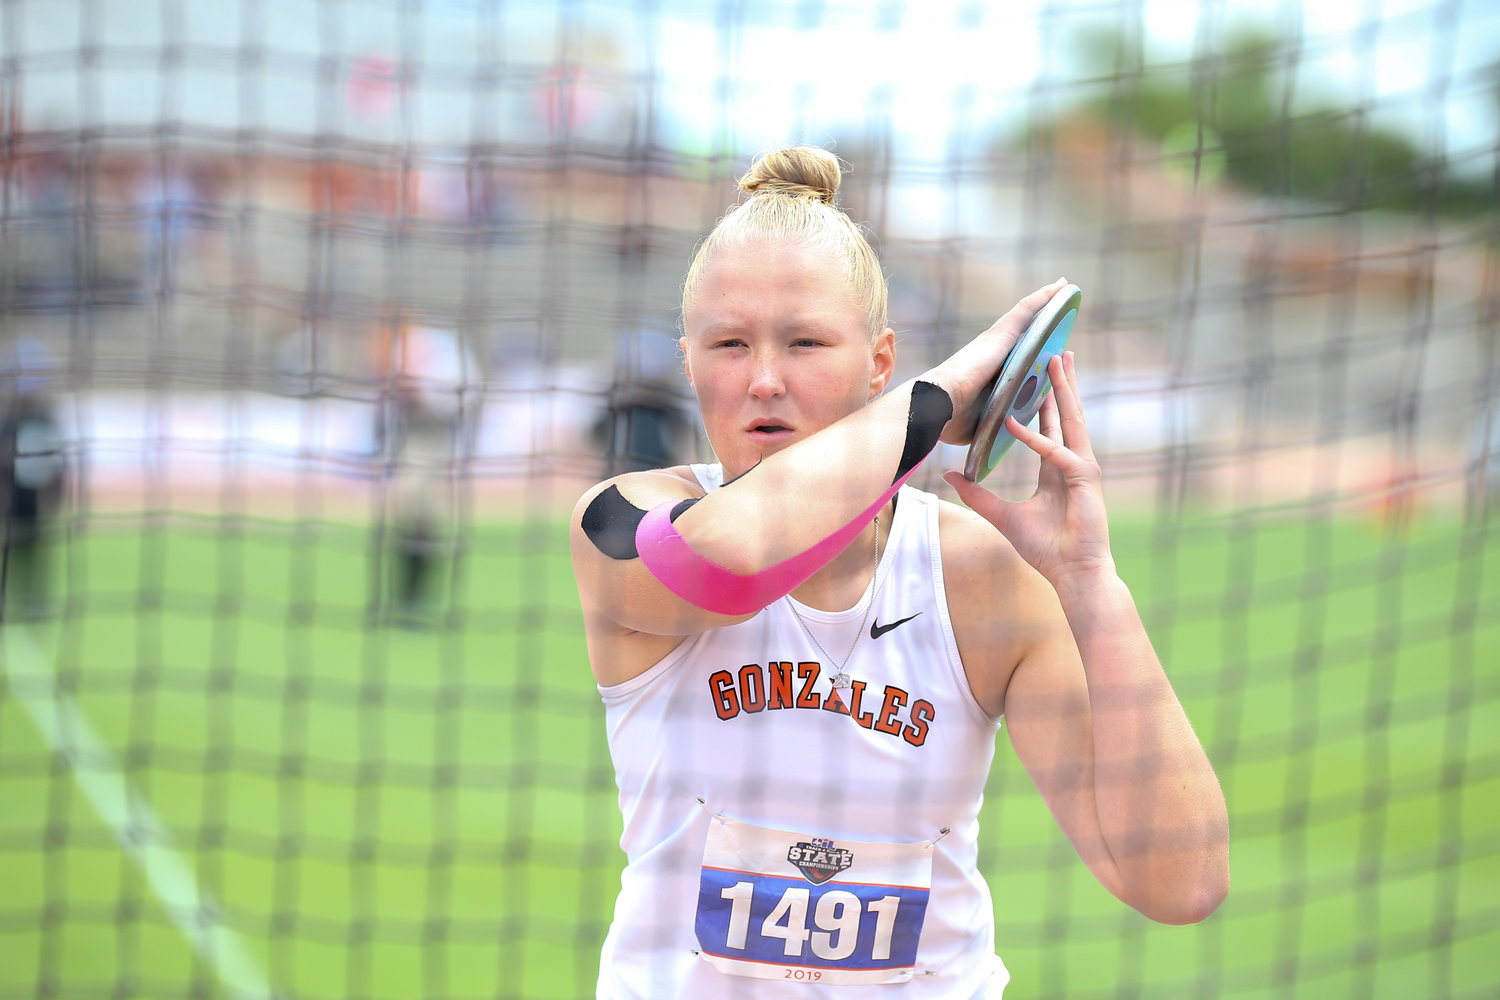 Devon Williams of Gonzales High School competes in the Class 4A girls discus event at the UIL State Track and Field Meet on Saturday, May 11, 2019 at Mike A. Myers Stadium in Austin, Texas.